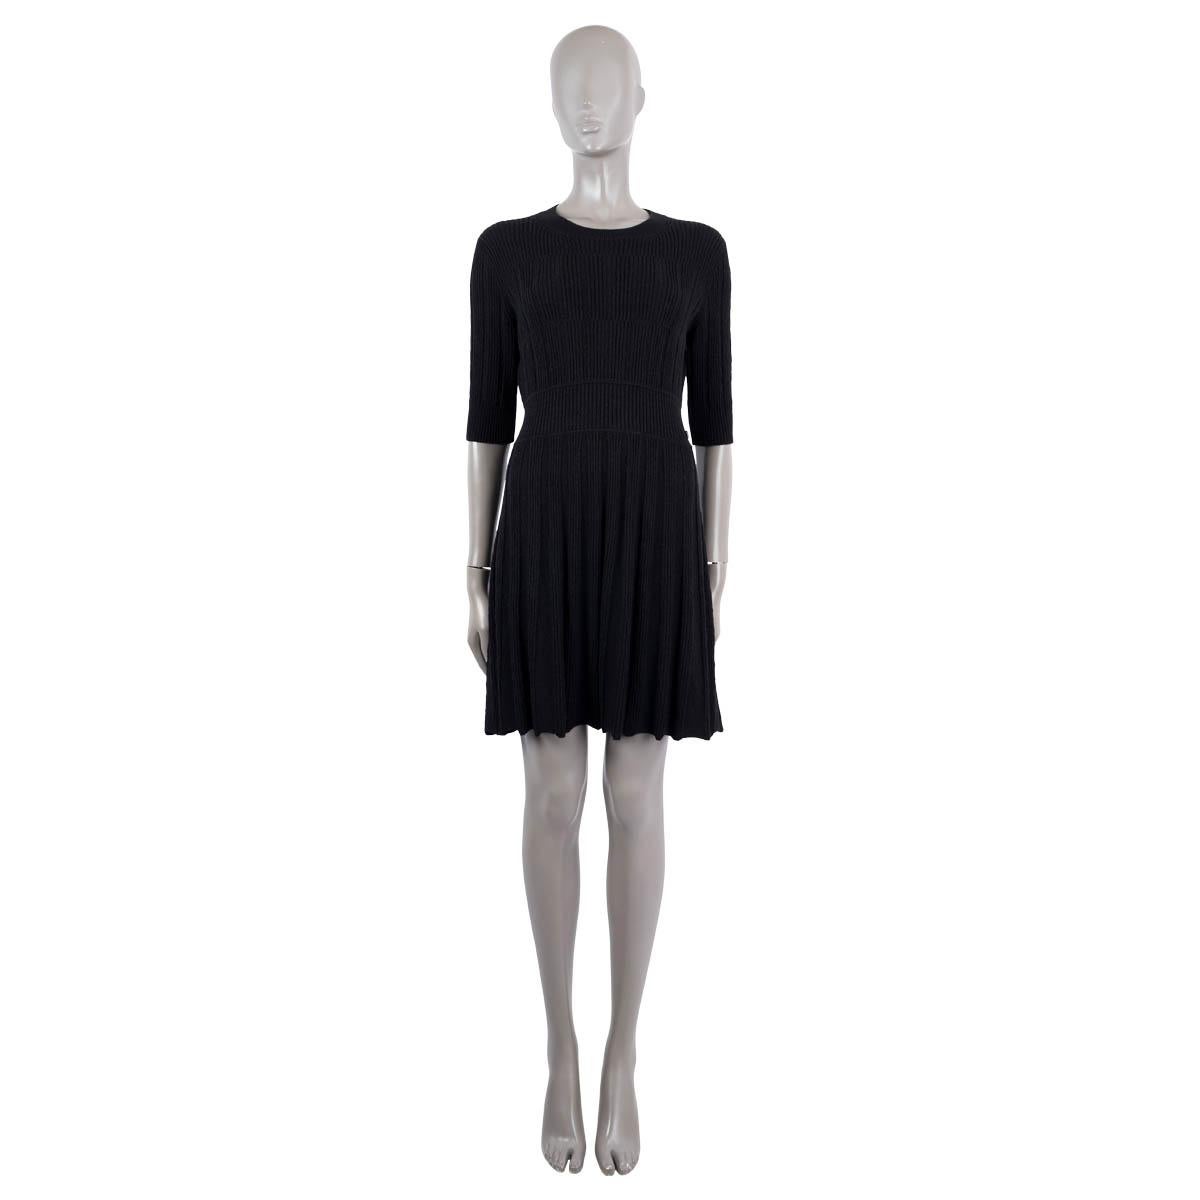 100% authentic Chanel textured flared rib-knit dress in black alpaca (67%) and wool (33%). Featuring short sleeves and waist band with logo button. Unlined. Has been worn and is in excellent condition.

2018